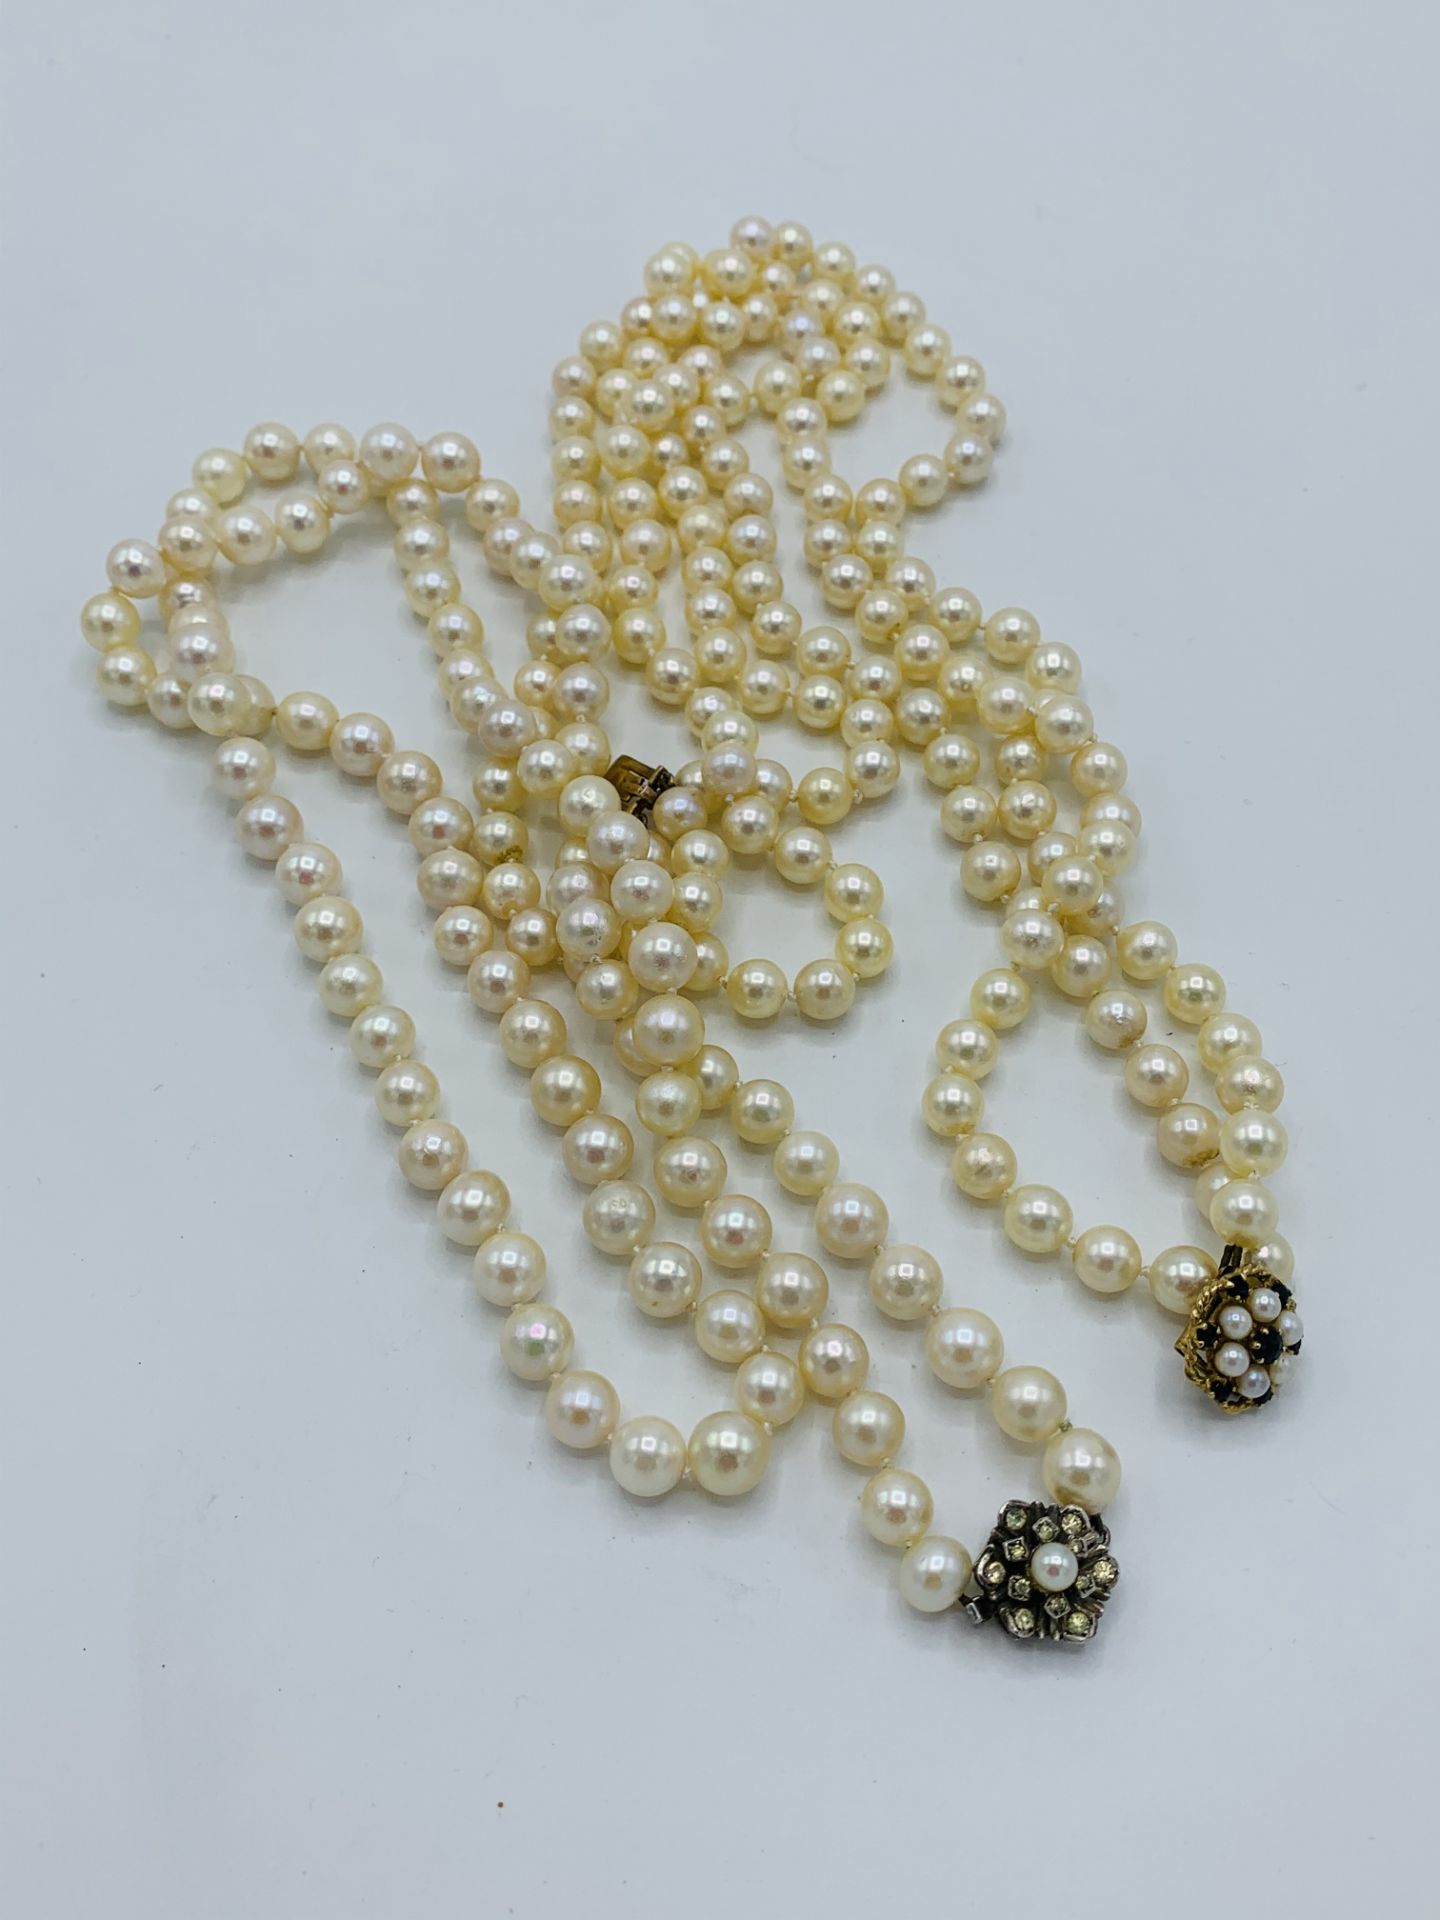 Necklace of 3 ropes of pearls with 9ct gold, sapphire and pearl clasp